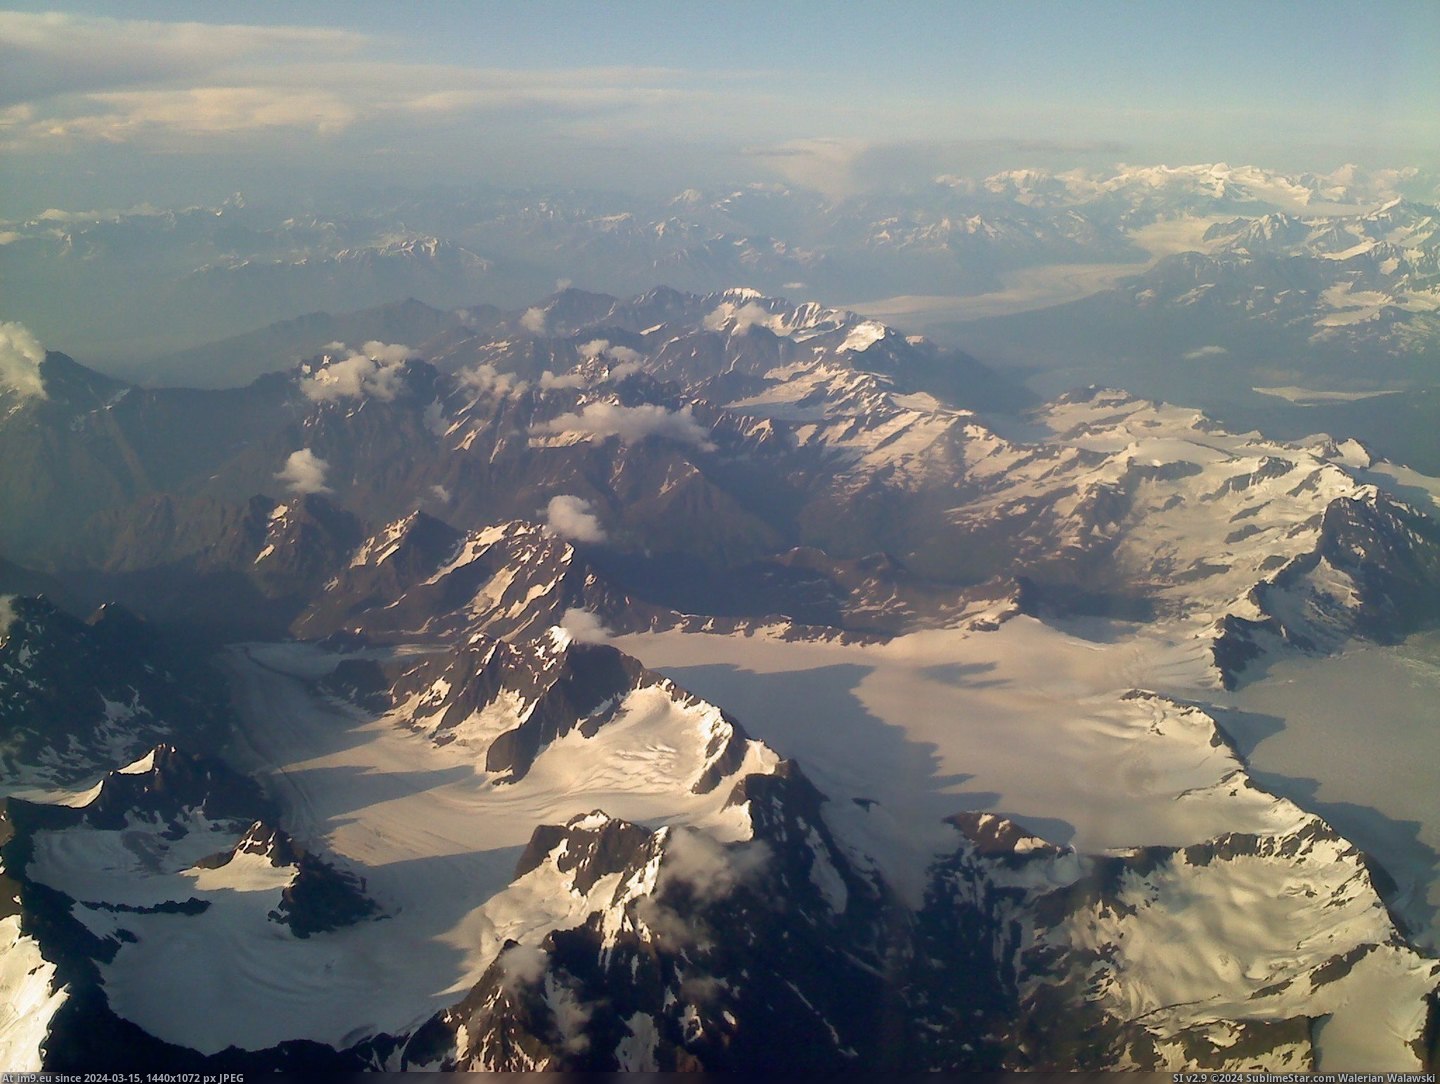 #Old #Phone #Smart #Anchorage #Whim #2048x1536 #Flying [Earthporn] [OC]Flying over Anchorage, AK. Taken with an old smart phone on a whim. [2048x1536] Pic. (Изображение из альбом My r/EARTHPORN favs))